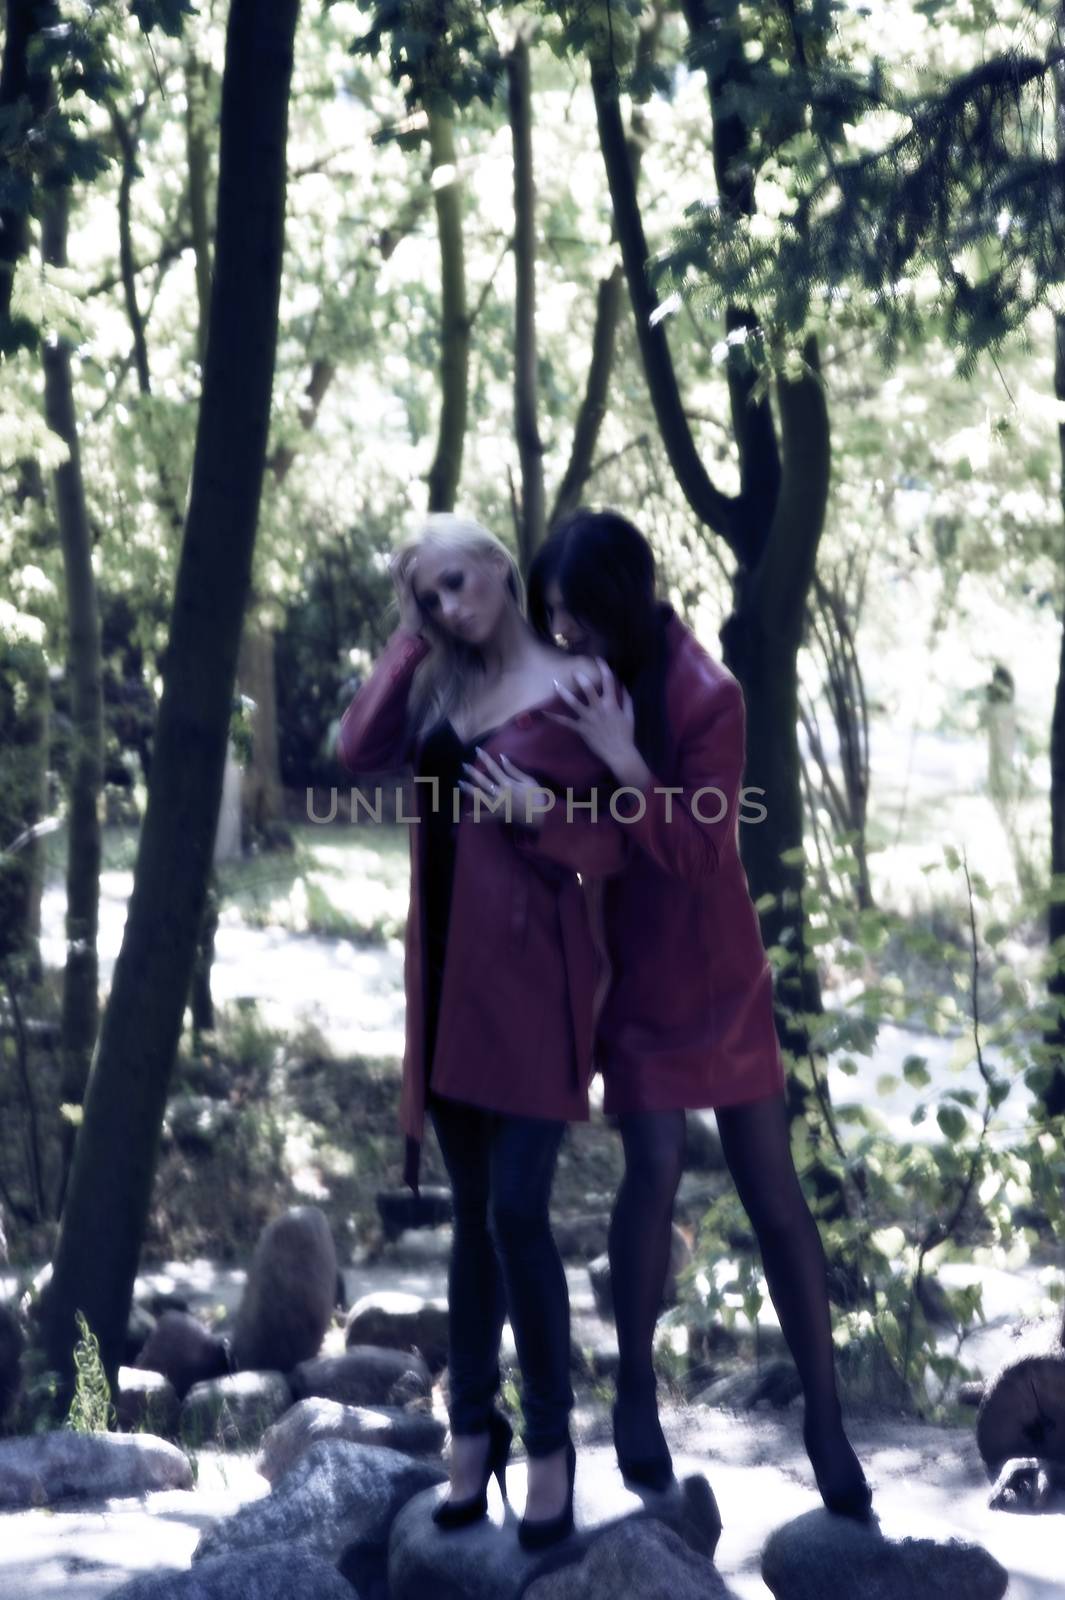 sexy and cute blond and brunette in a park like vampire the photo had moving blur